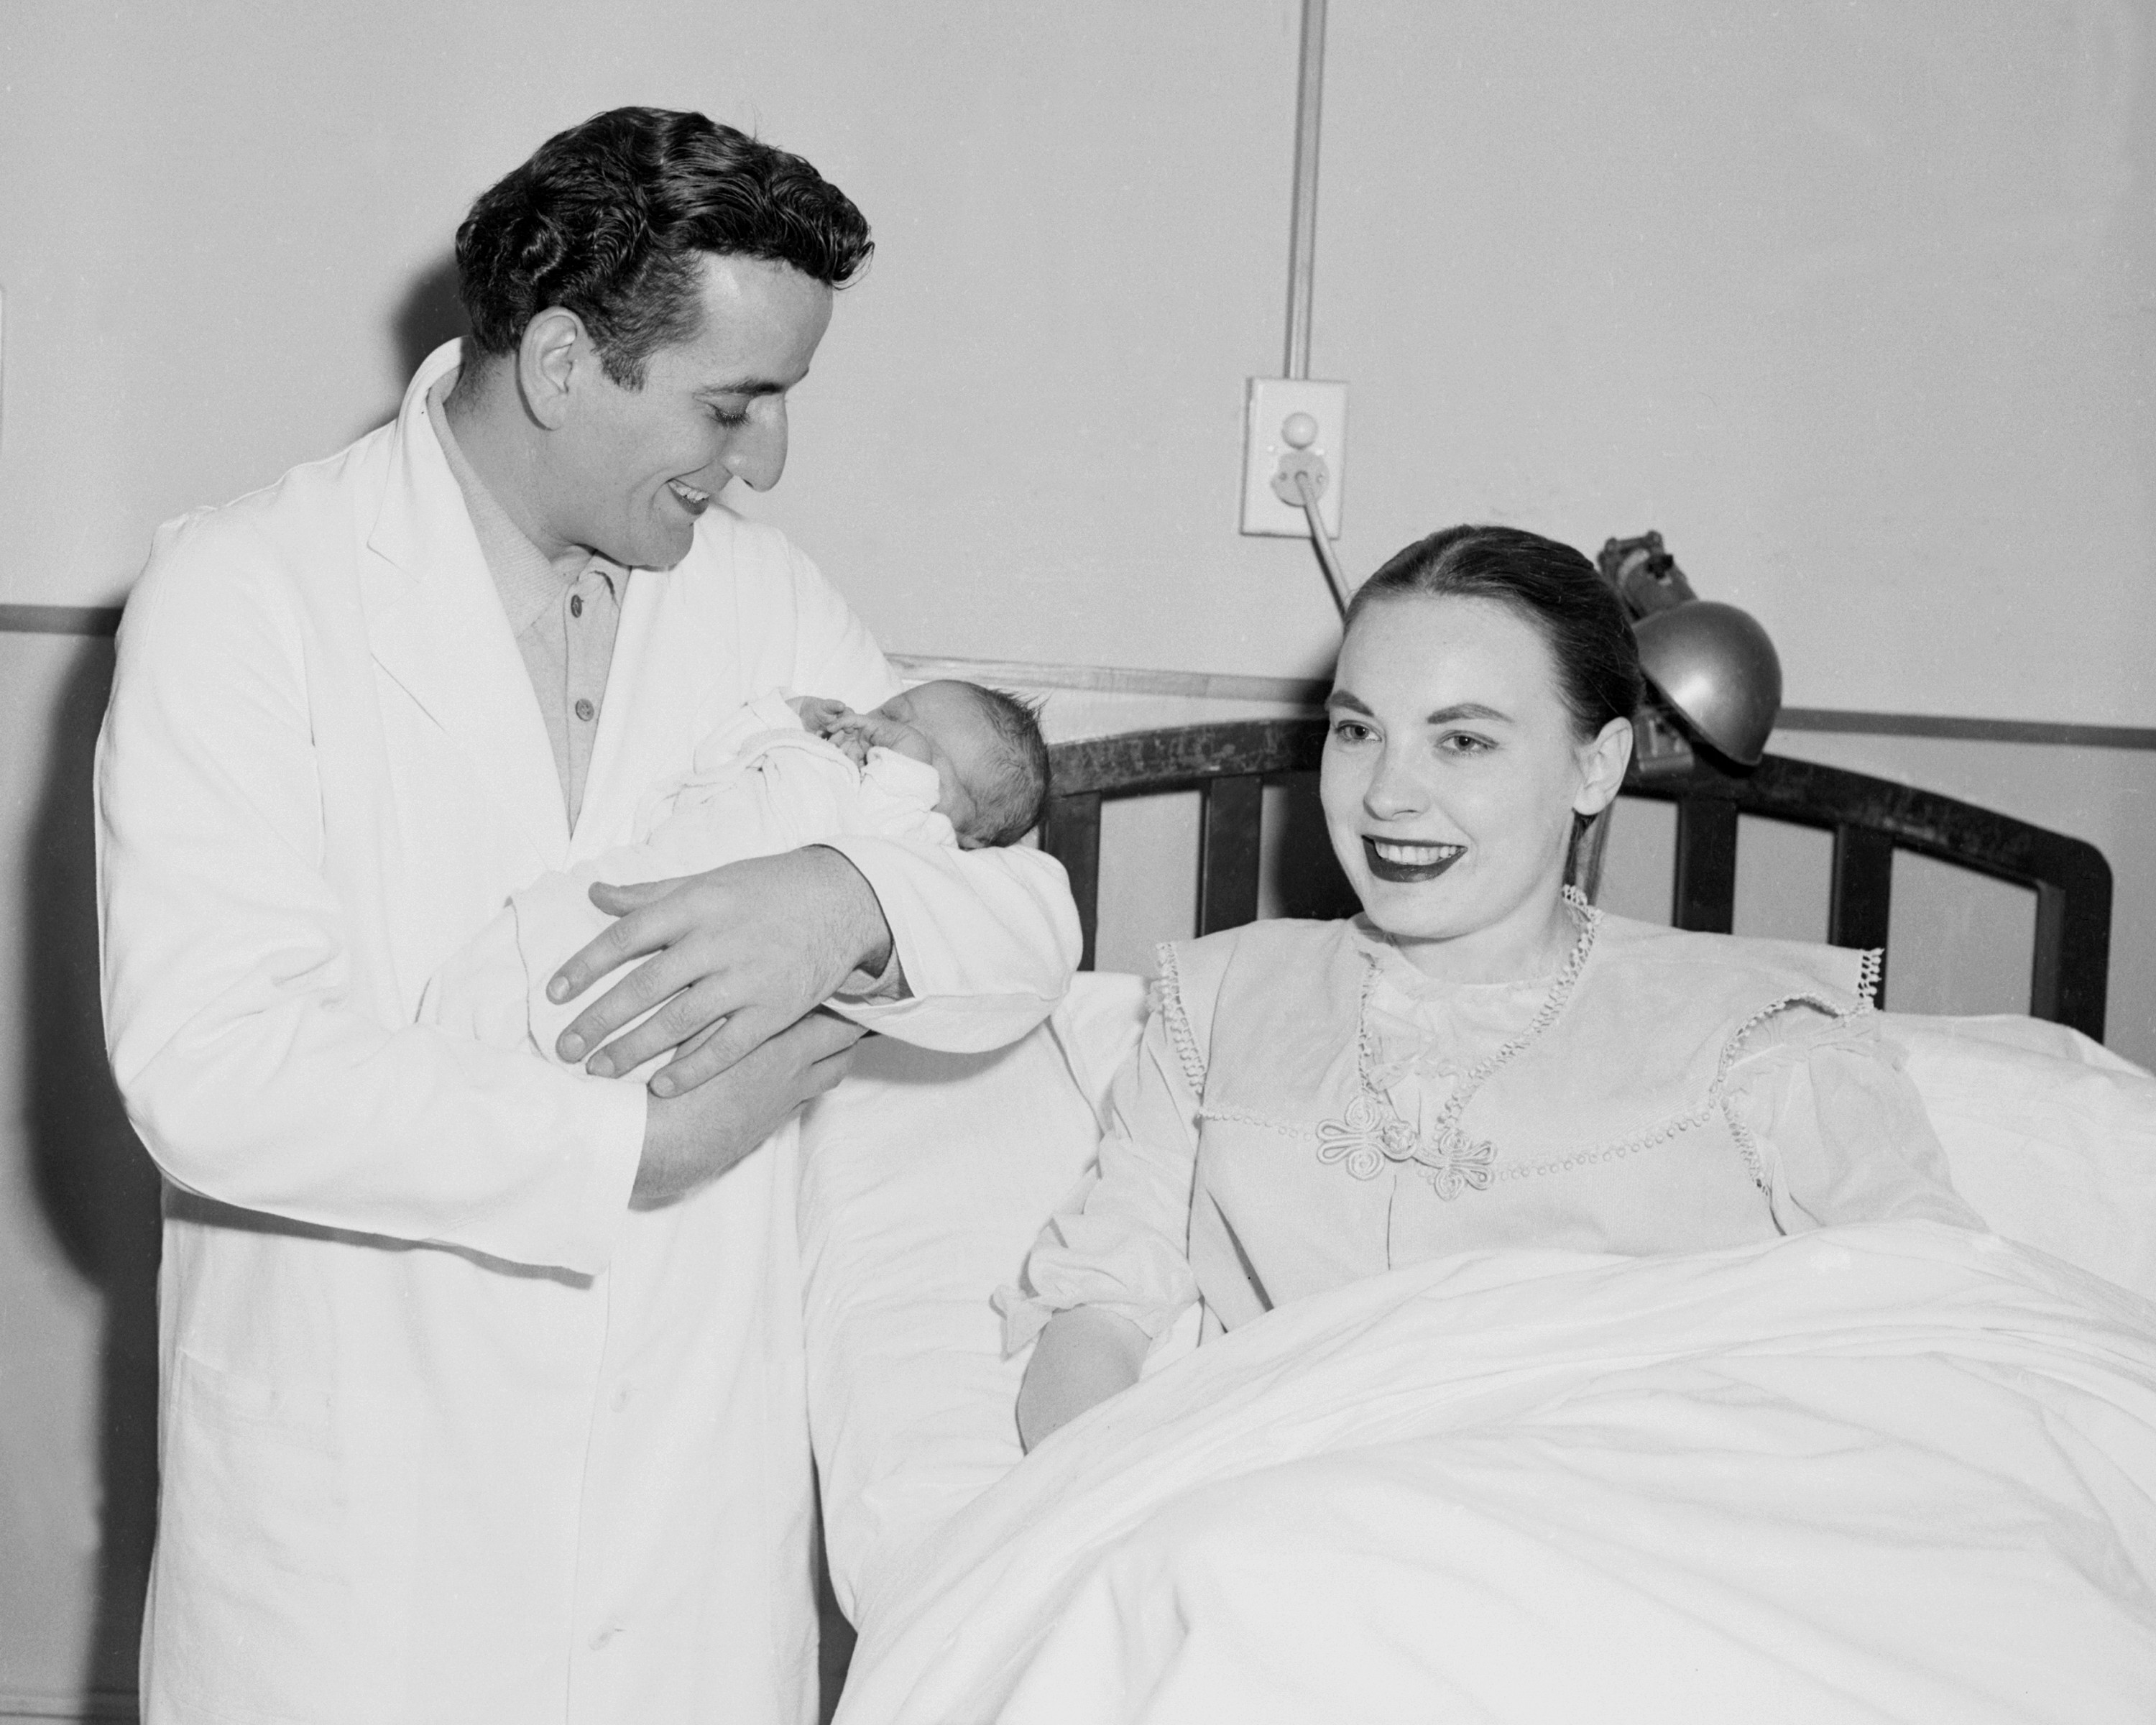 Tony Bennett with his son Danny and Patricia Beech at the Lebanon Hospital on February 3, 1954, in the Bronx, New York | Source: Getty Images